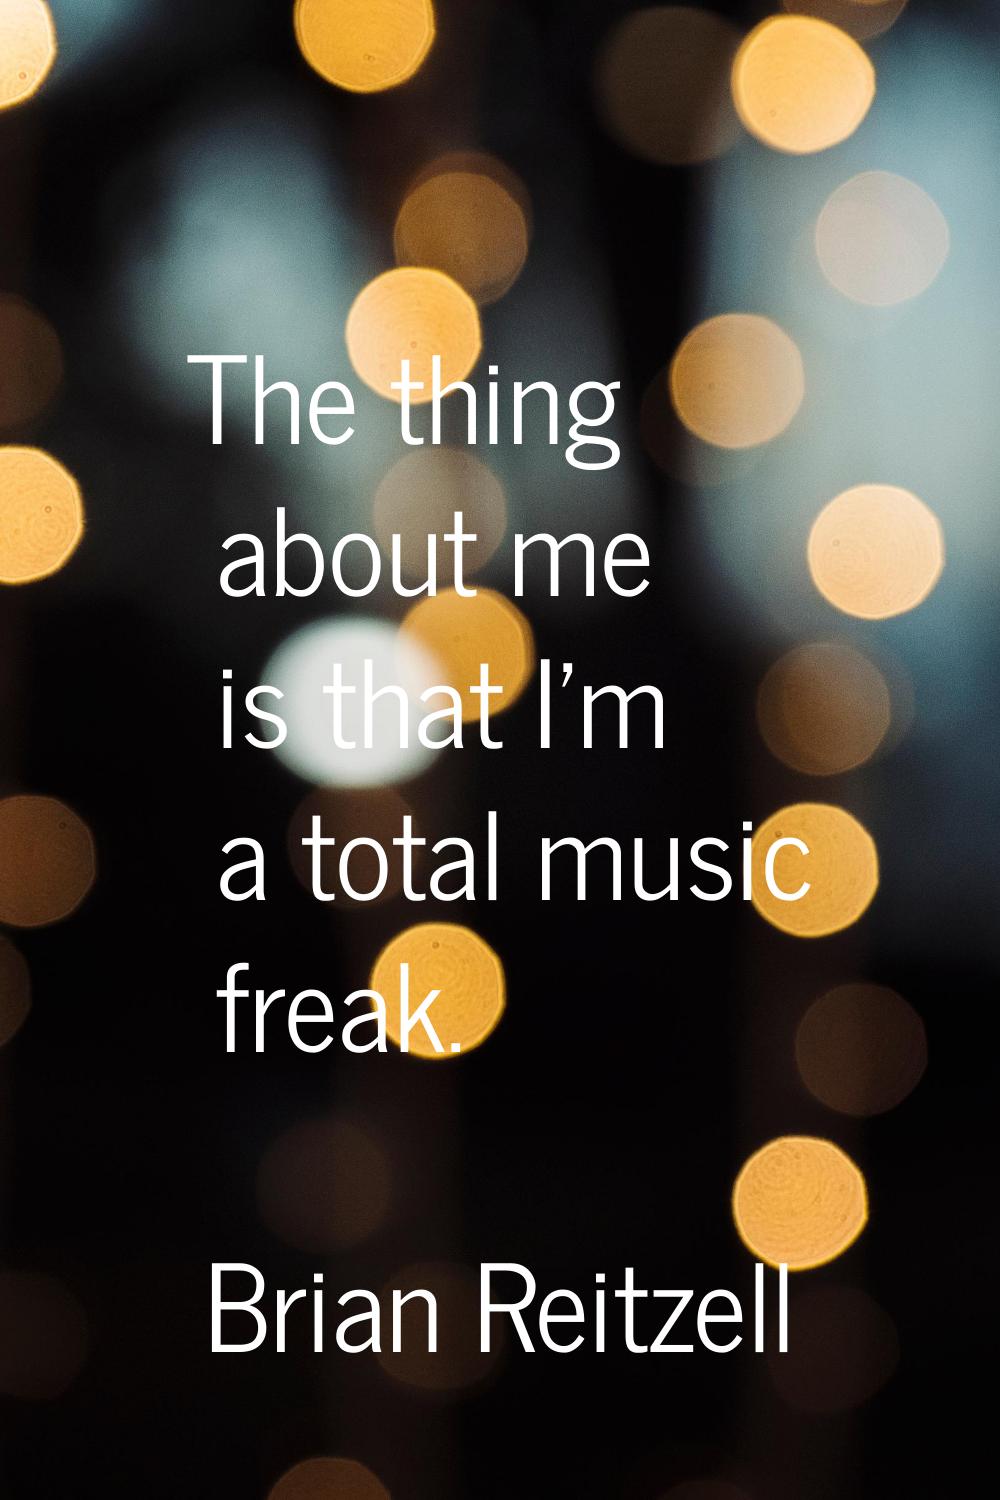 The thing about me is that I'm a total music freak.